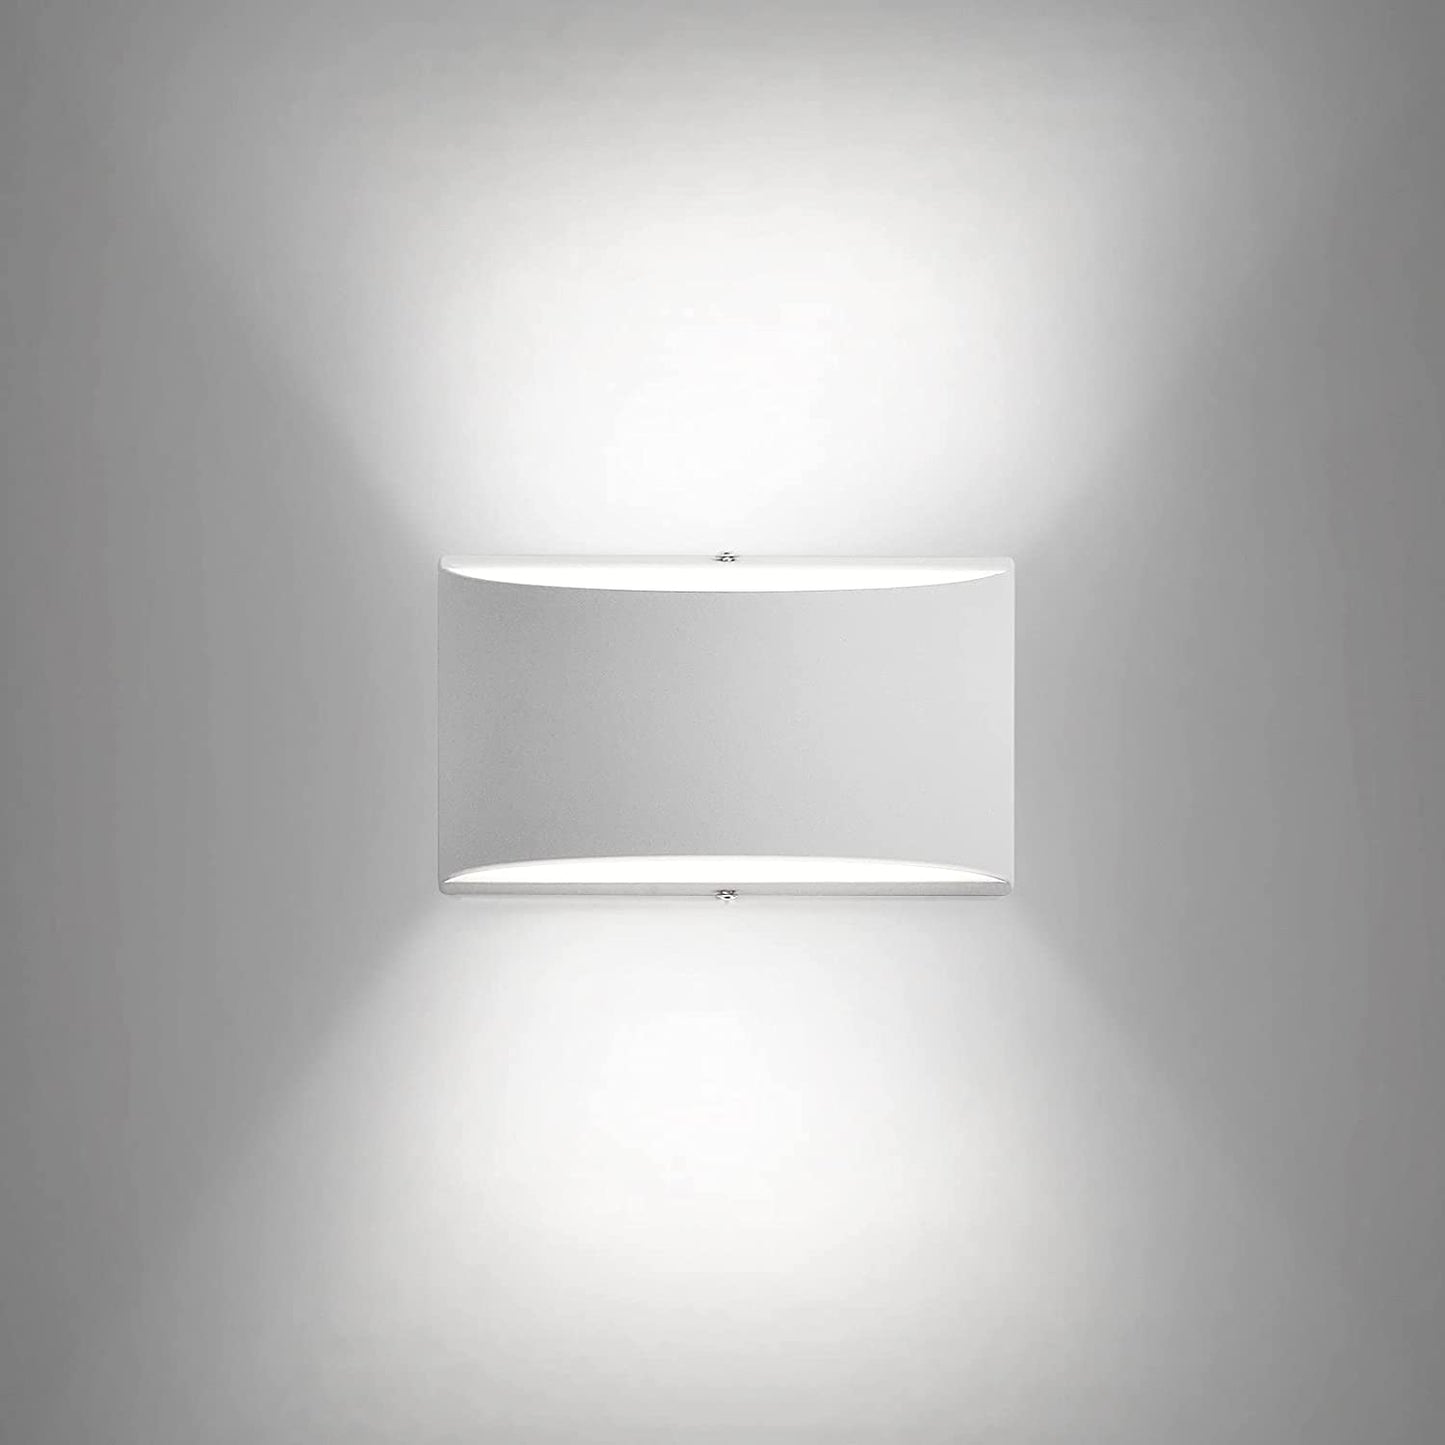 LED Wall Sconce,Up and Down Indoor Wall Lamps, Wall Lighting Fixture Lamps, Interior Wall Lights for Living Room, Bedroom, Hallway,Corridor,Conservatory Cool White 6000K(1PCS Wall Sconce)